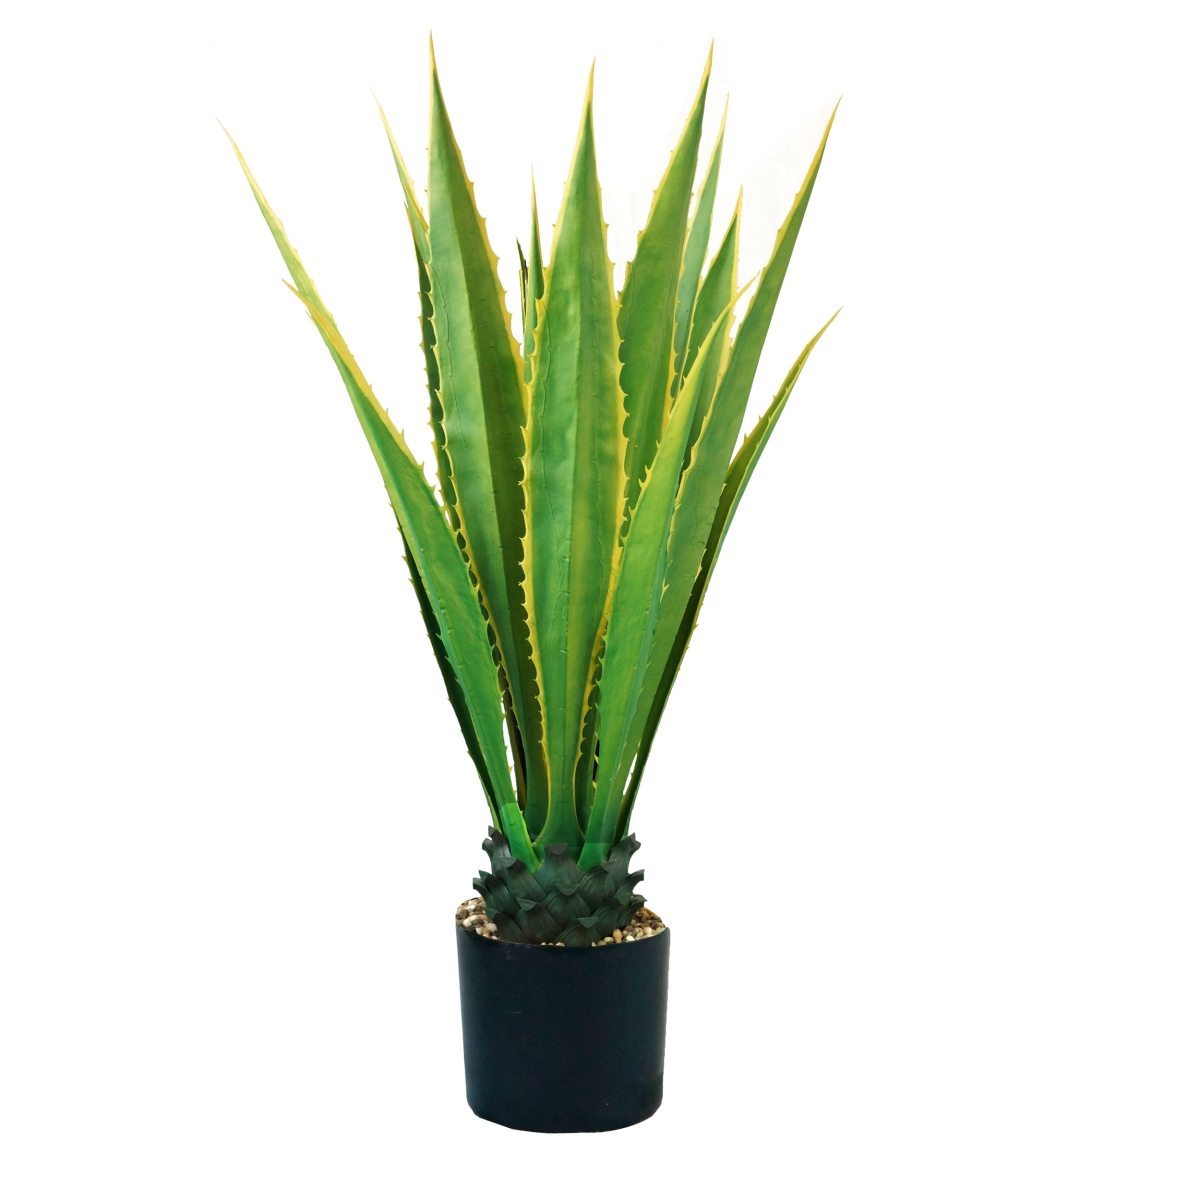 Vhx147 40 In. Indoor & Outdoor Agave Plant In Planter